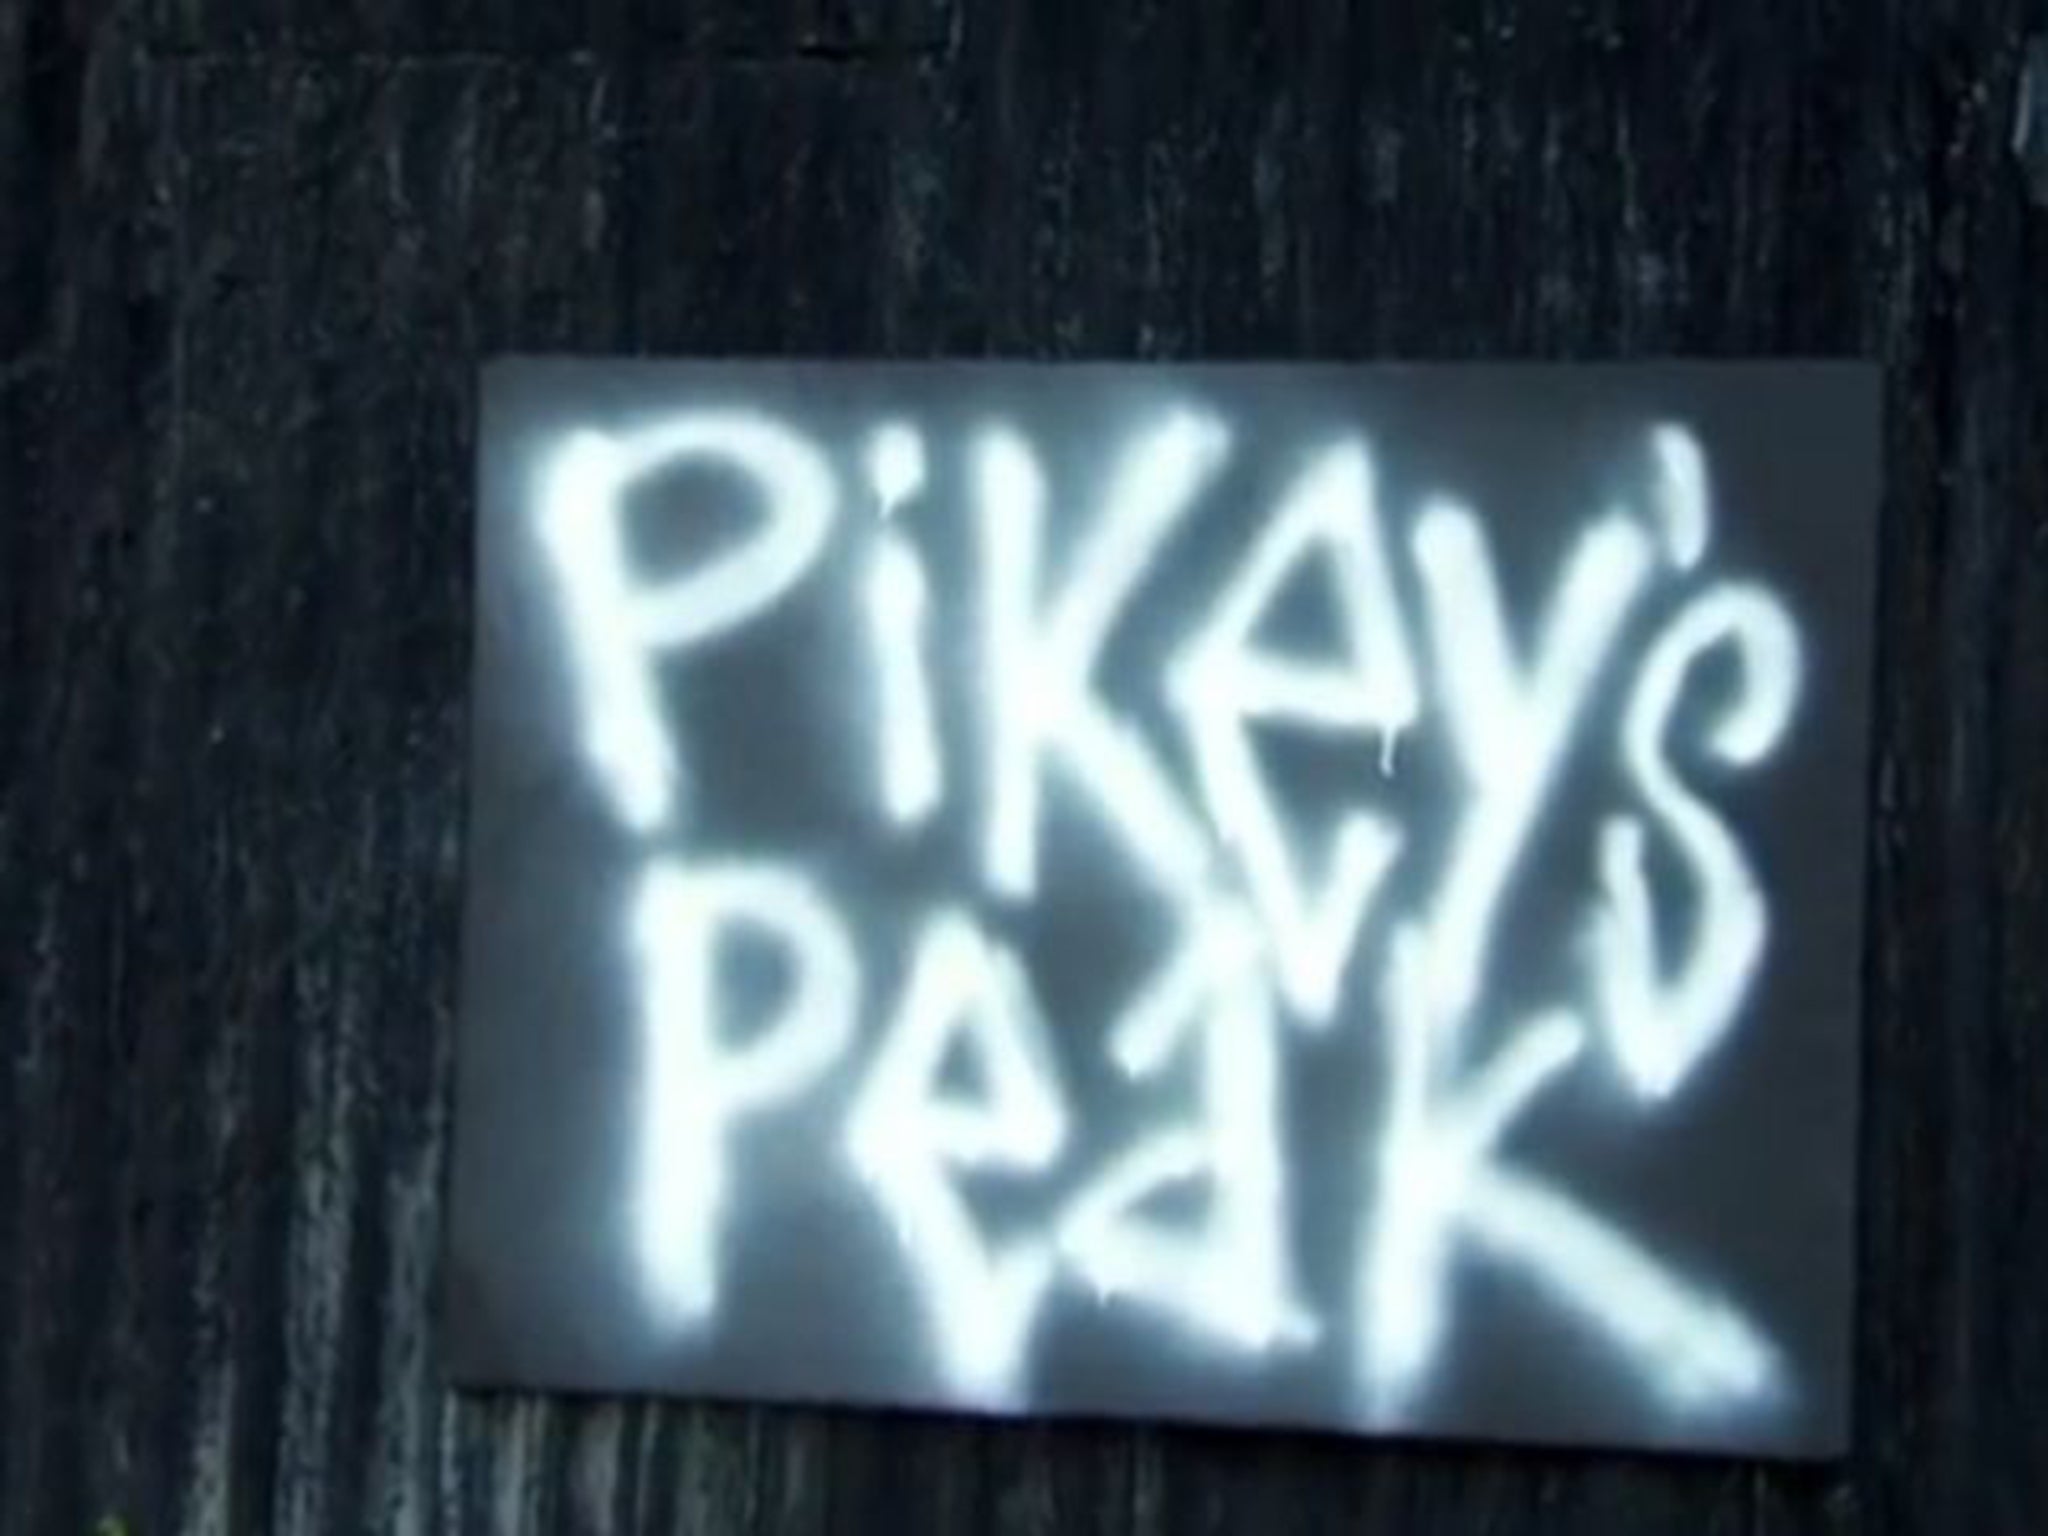 According to the Oxford English Dictionary, the word “pikey” is an offensive term which derives from “pike” – an old word for a road on which a toll is collected